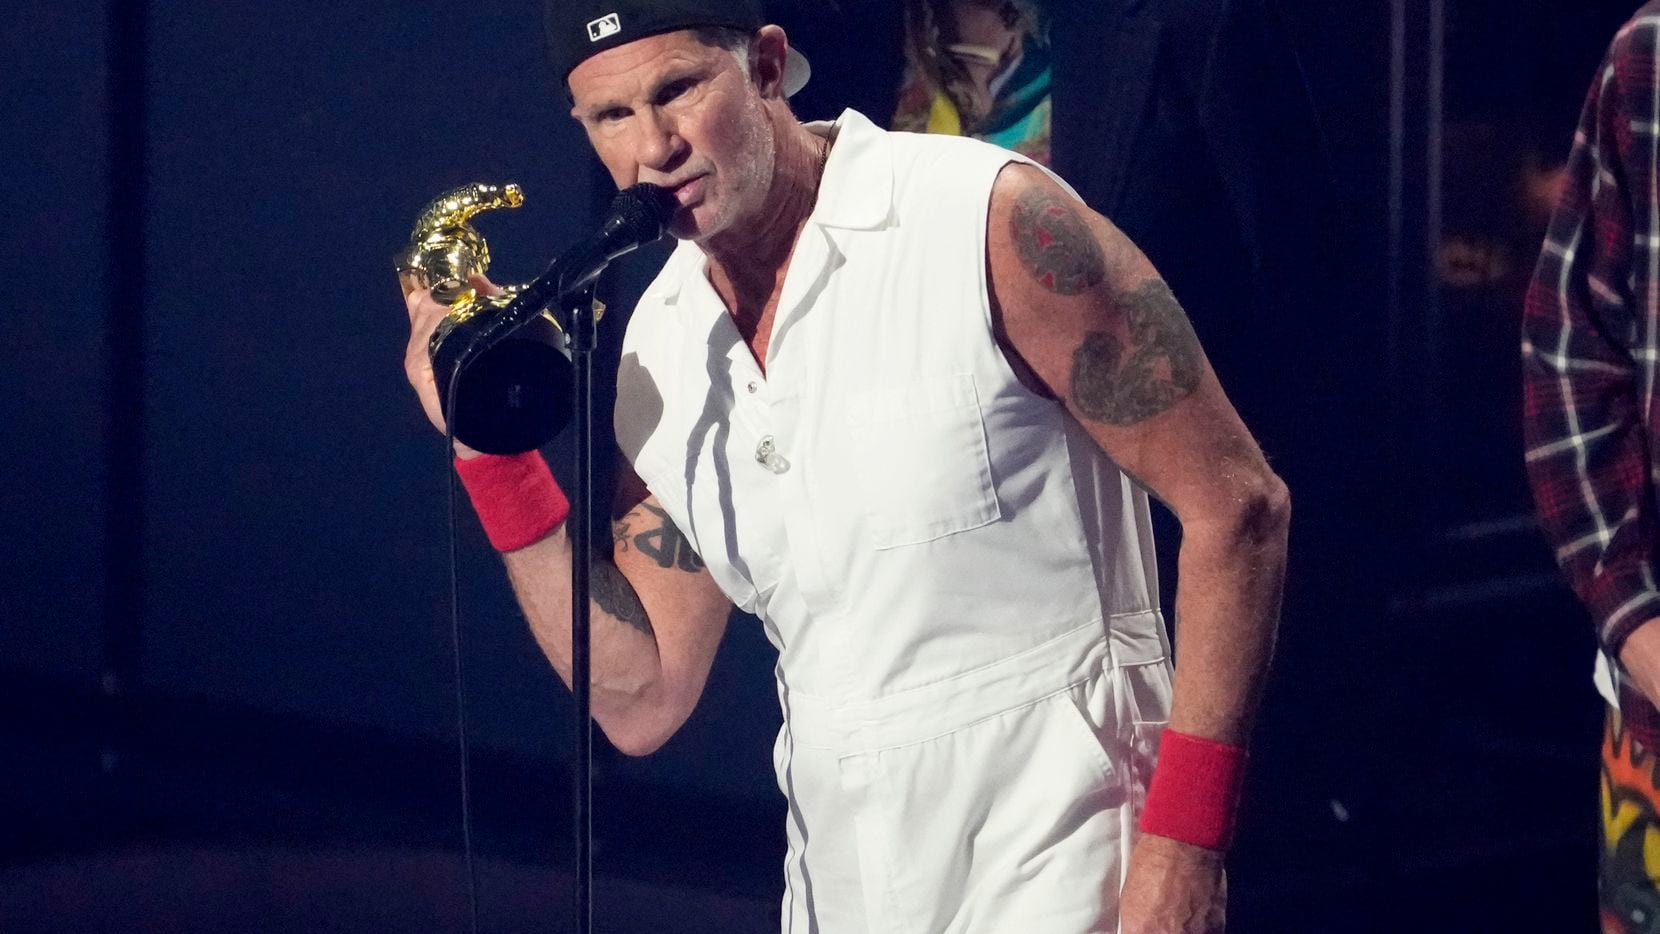 Chad Smith, of Red Hot Chili Peppers, accept the global icon award at the MTV Video Music...